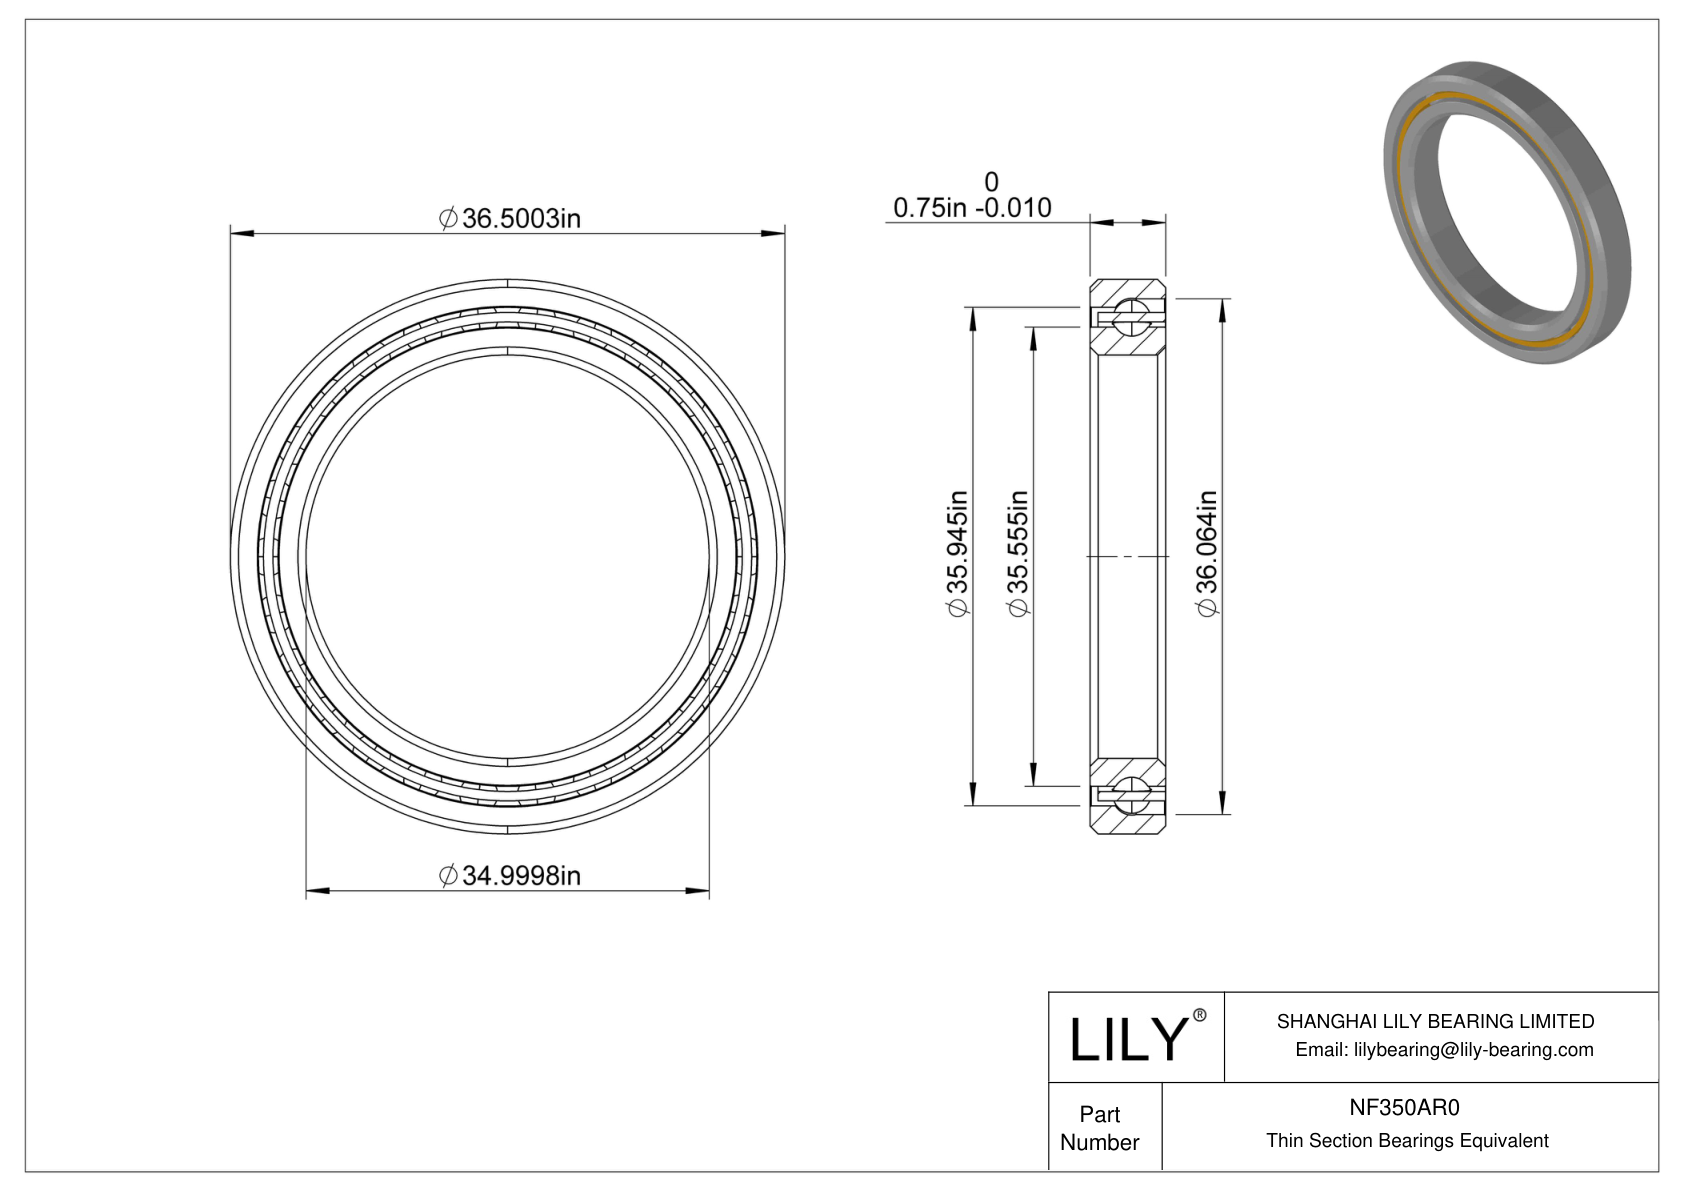 NF350AR0 Constant Section (CS) Bearings cad drawing